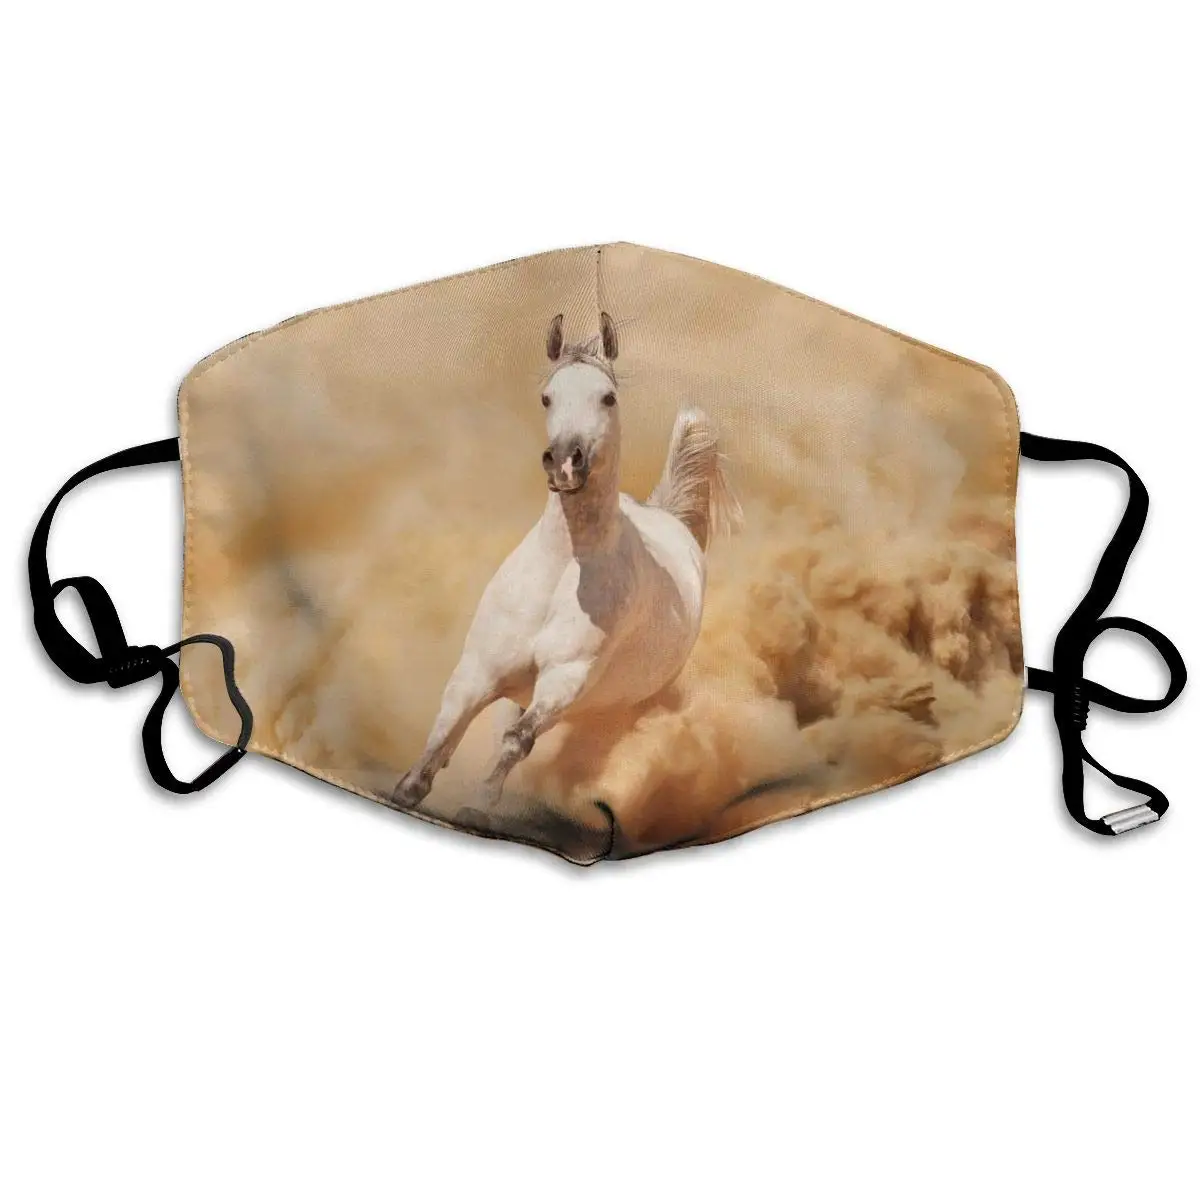 

Running Horse Dust Mask, Reusable Washable Mouth Masks, Adjustable Warm Face Mask Unique Cover Filters Blocking Pollen Pollution